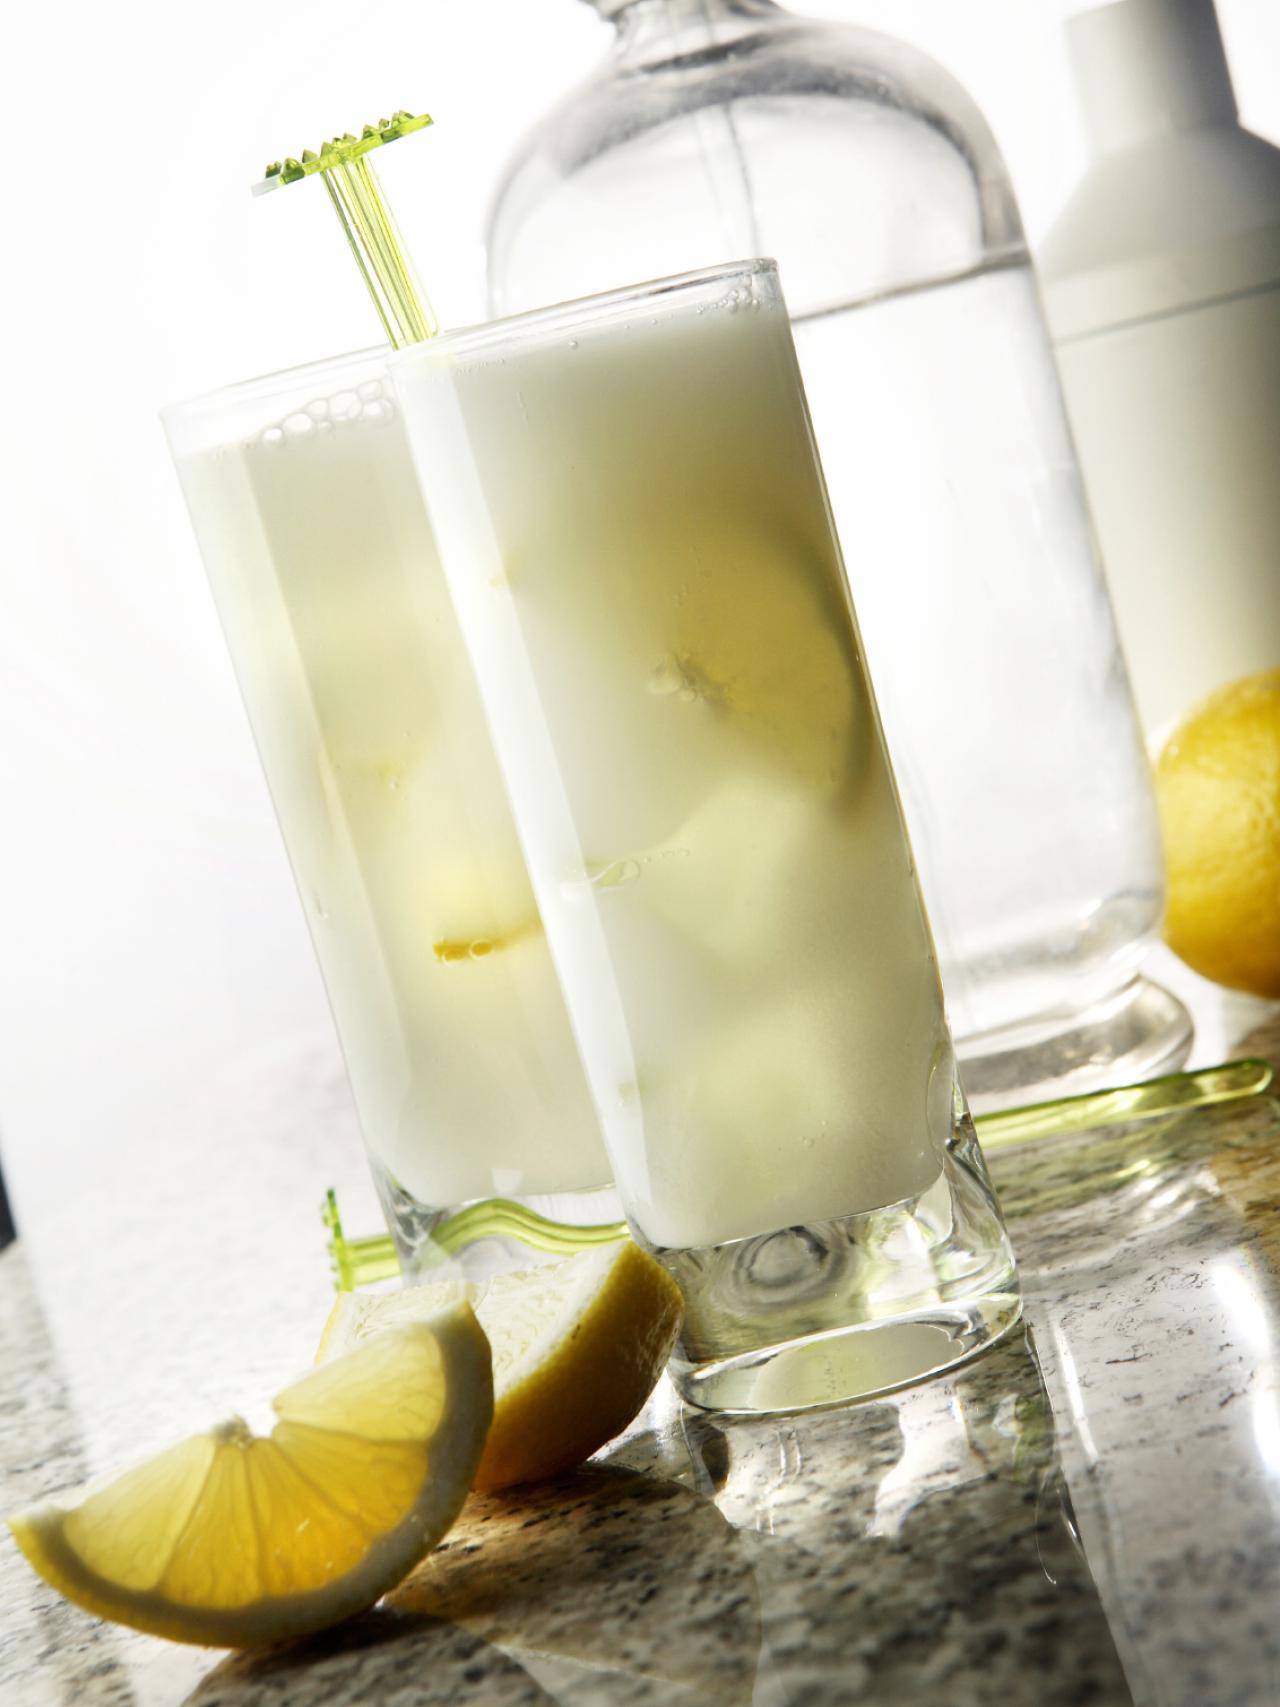 Tom Collins Cocktail Recipe Hgtv,What Is Pectin In Plants